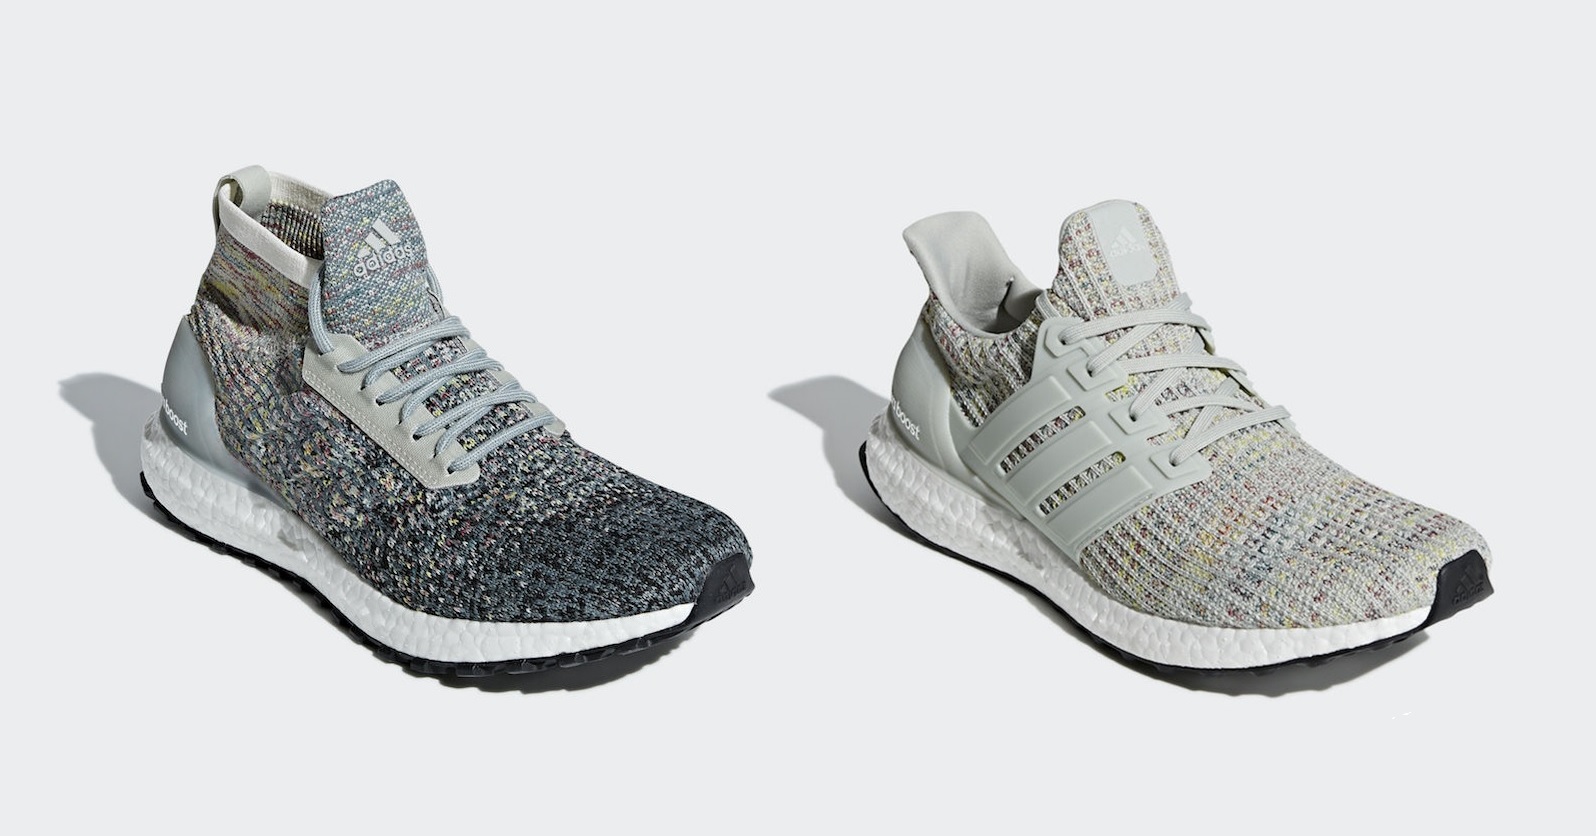 SURPRISE ULTRA BOOST PACKAGE FROM ADIDAS